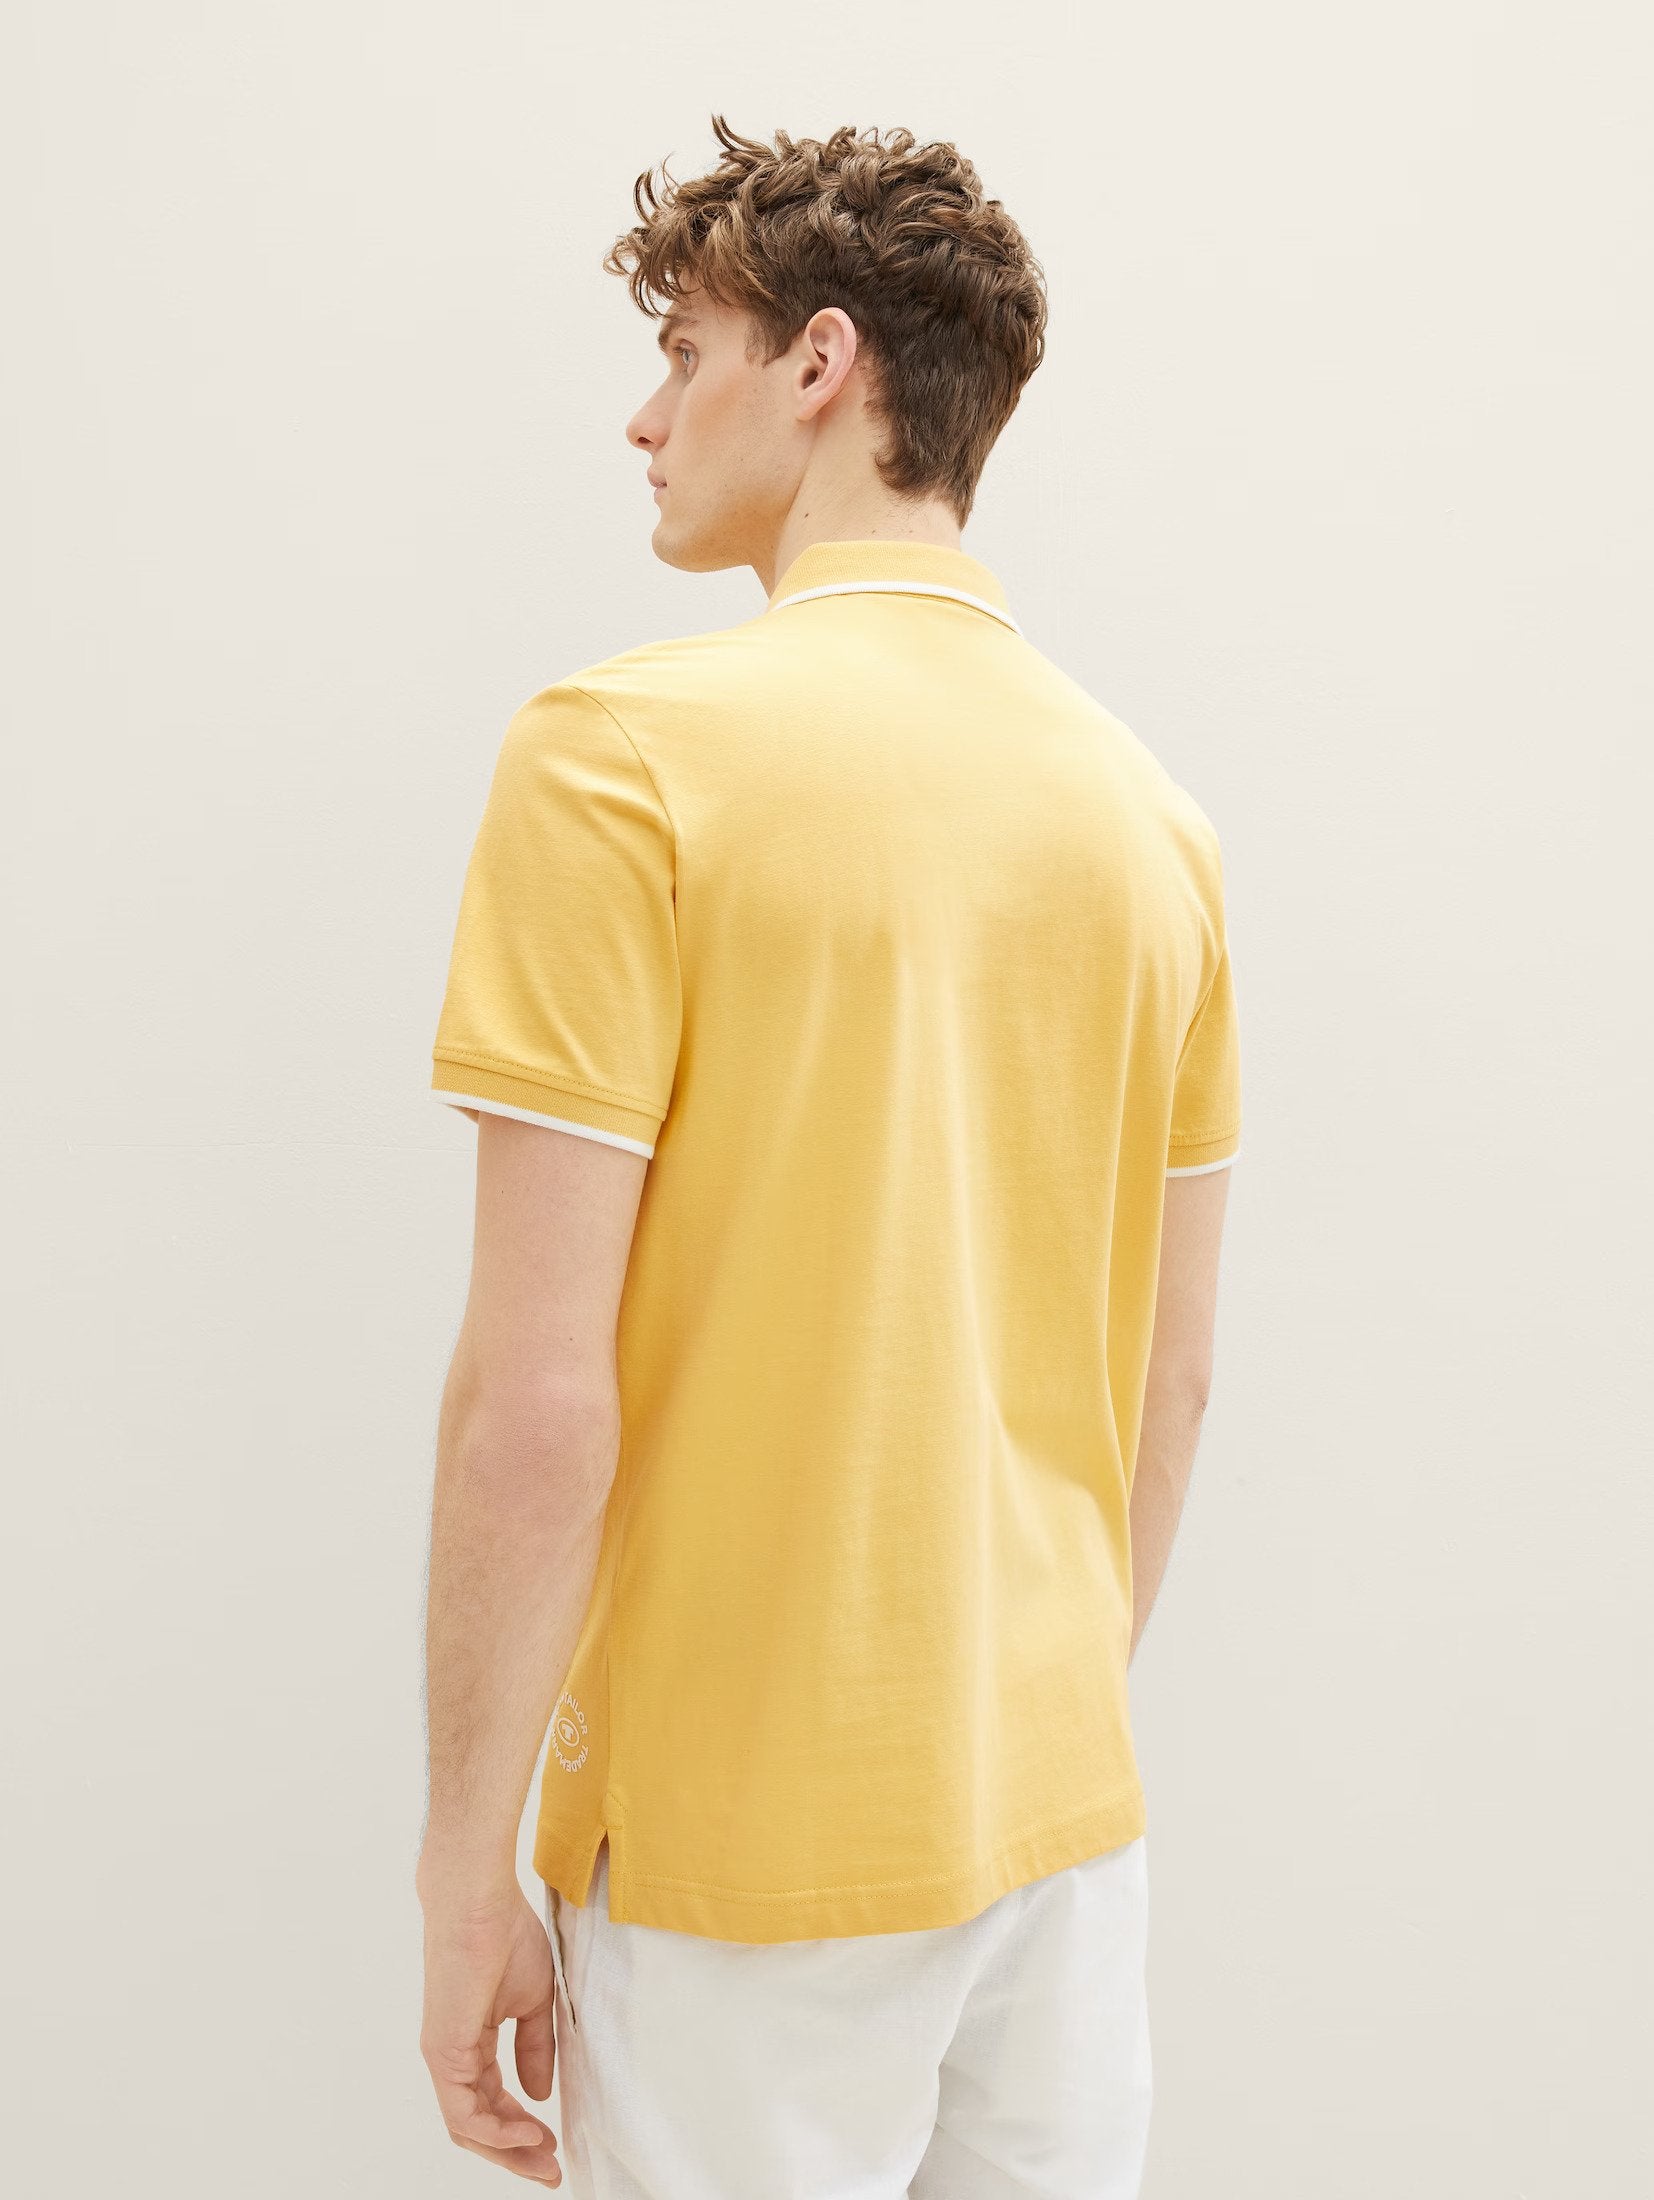 Tom Tailor Yellow Polo With White Designed Ends